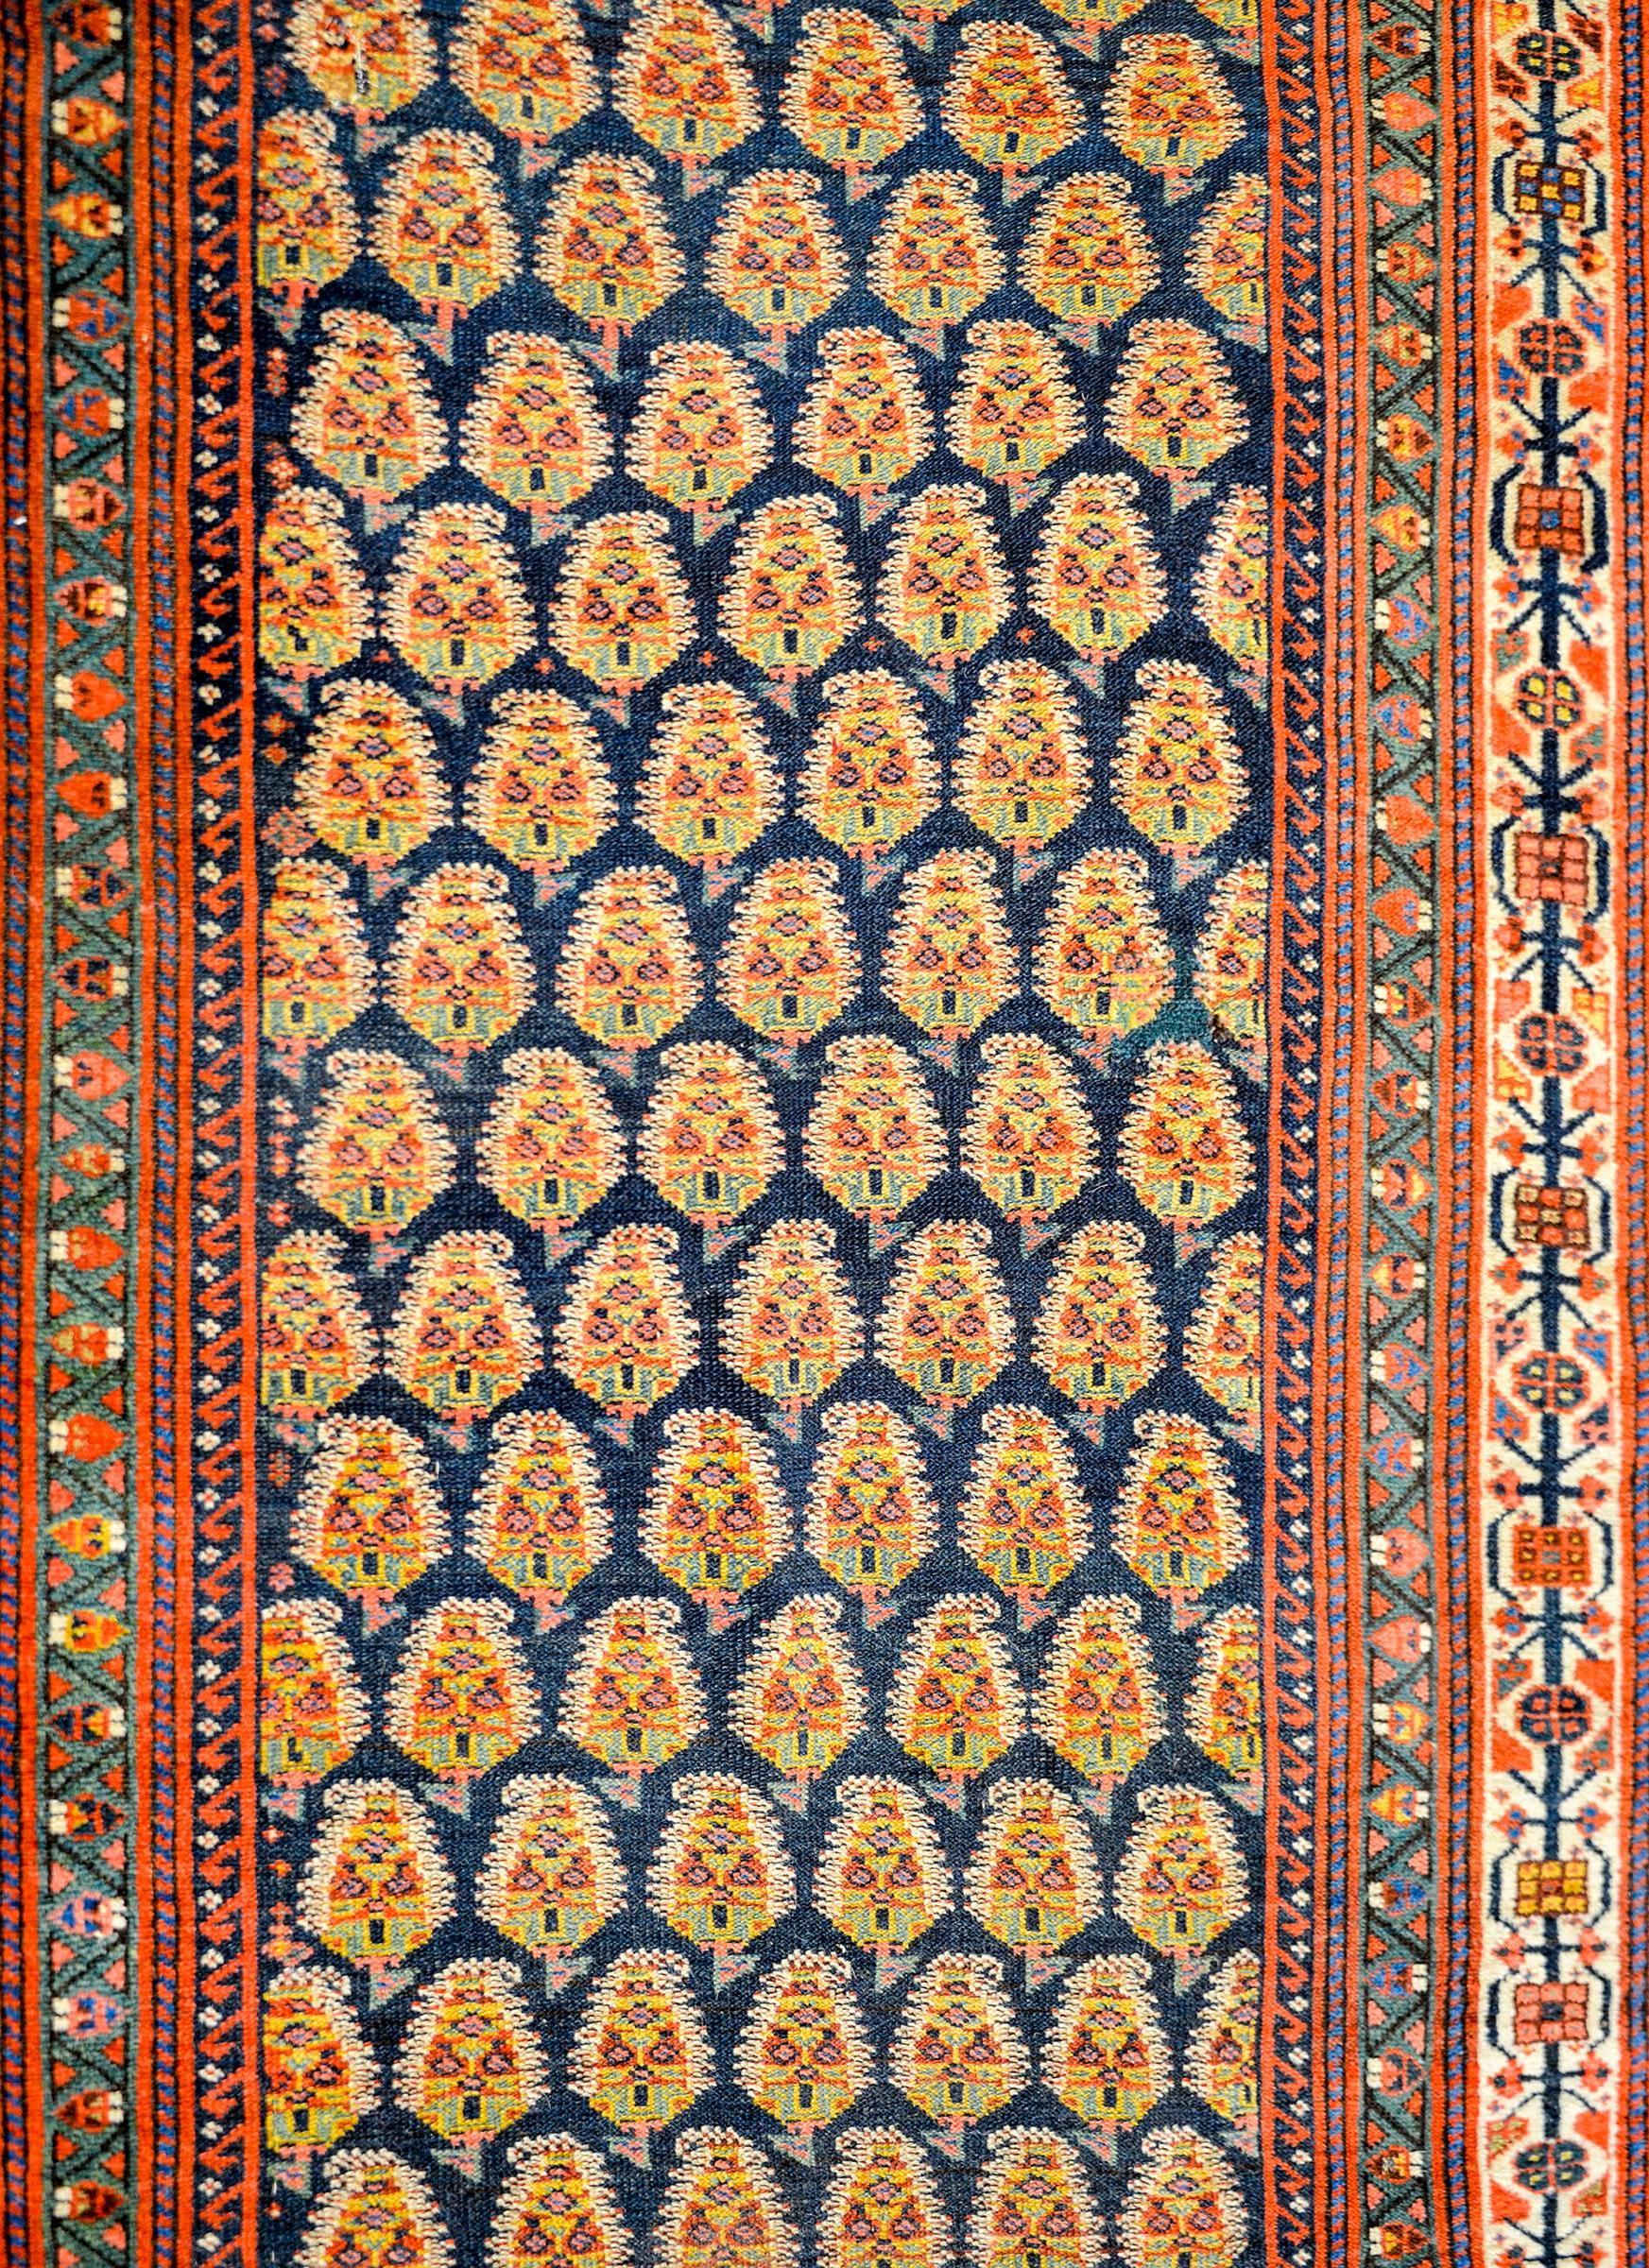 An amazing late 19th century Persian Afshar runner with a central field containing and all-over multi-colored paisley pattern woven in crimson, green, pink, gold, and indigo colored vegetable dyed wool, on a dark indigo background. The border is